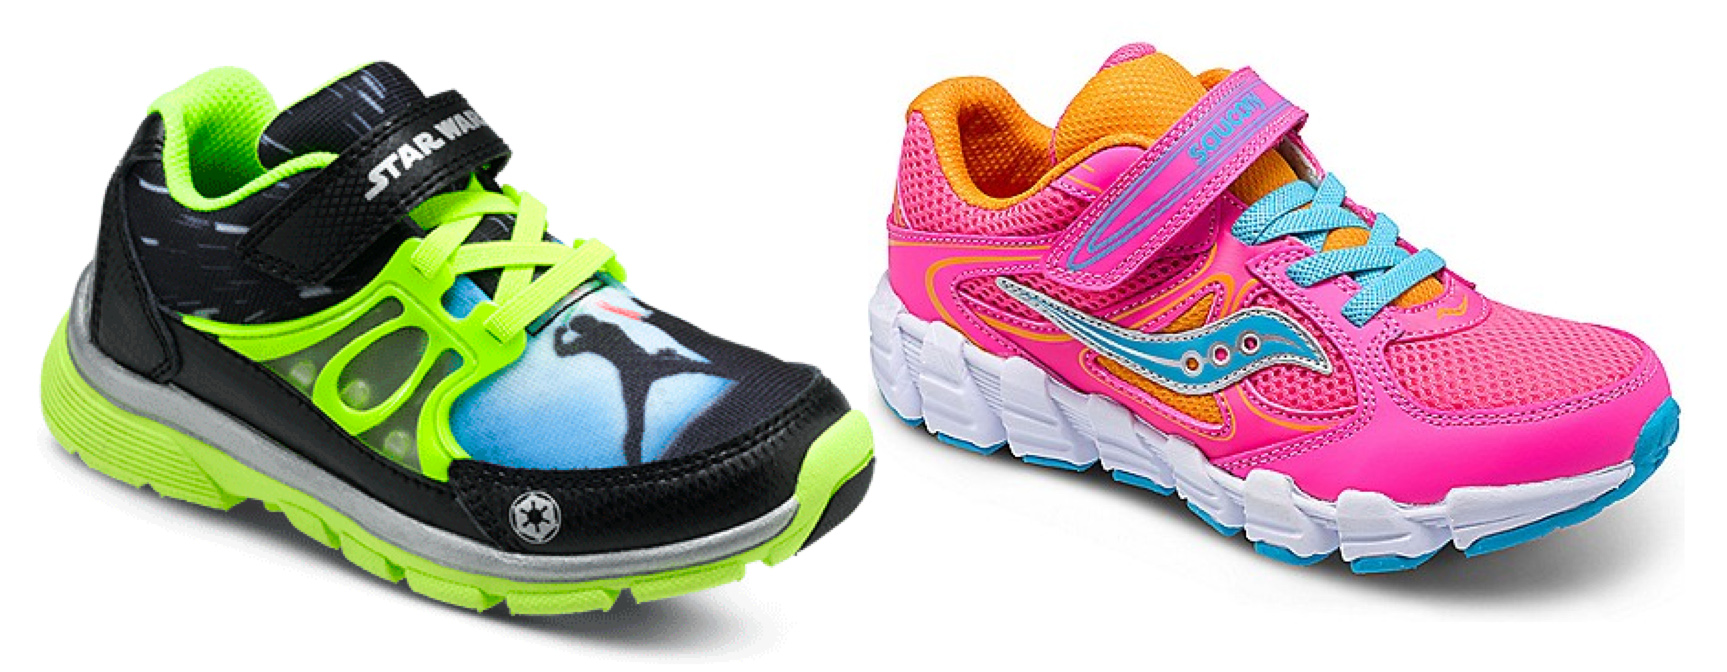 Stride Rite Flash Sale: Kids’ Shoes ONLY $19.99 Shipped - Regularly $56 ...